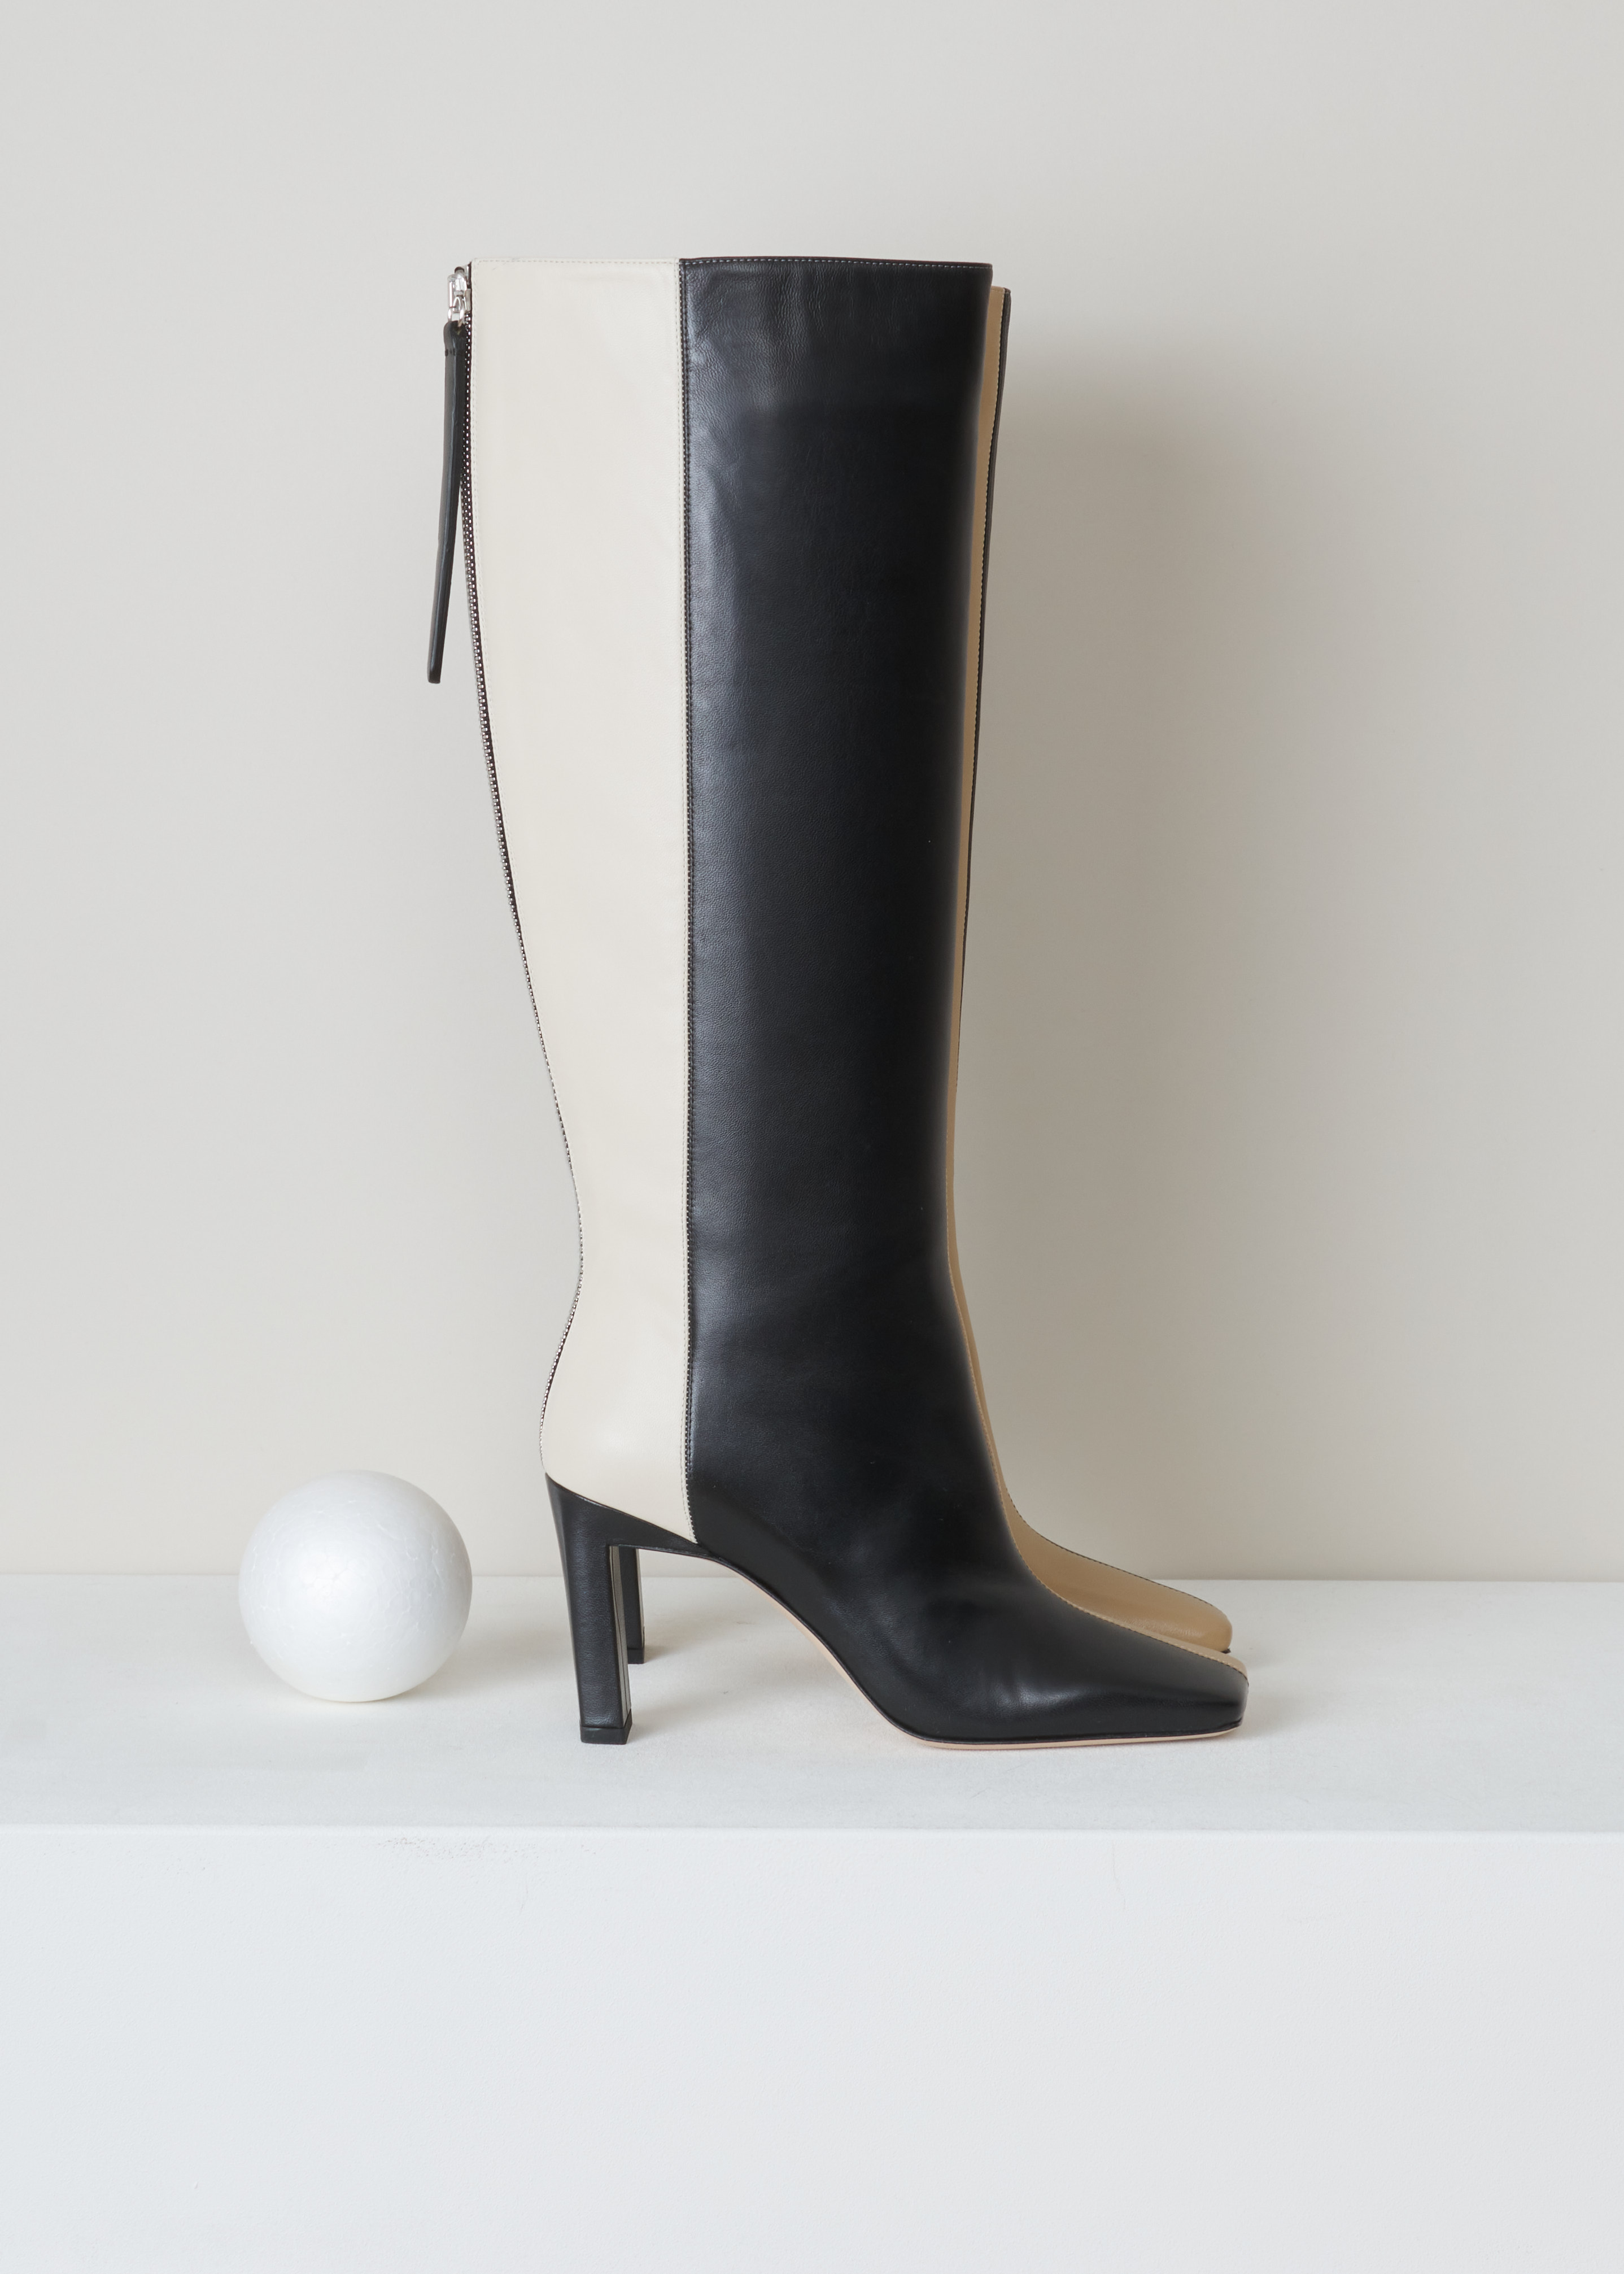 Wandler Isa long boot ISA_LONG_BOOT_TOAST_MIX toast mix side. Isa long boot with a bold architectural shape,in white, beige and black vertical lanes.  A chic square toe metal zipper fastening on the back and squared high heel.

Heel height: 8.5 cm / 3.4 inch.